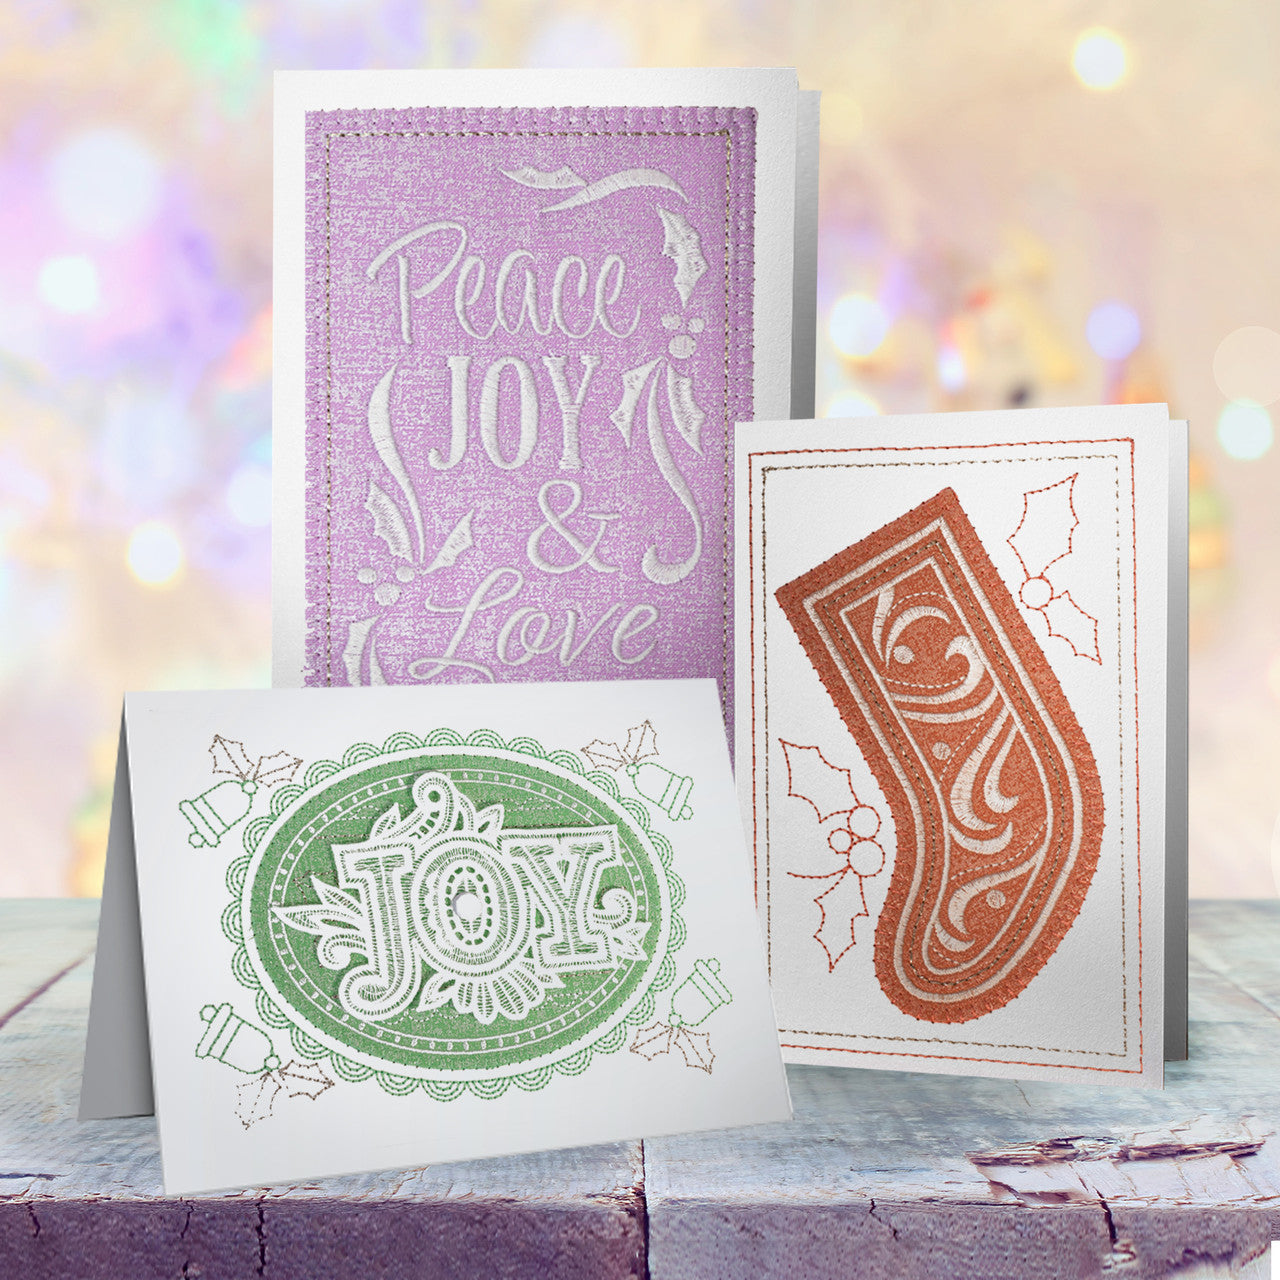 OESD Shimmering Holiday Cards Design Collection